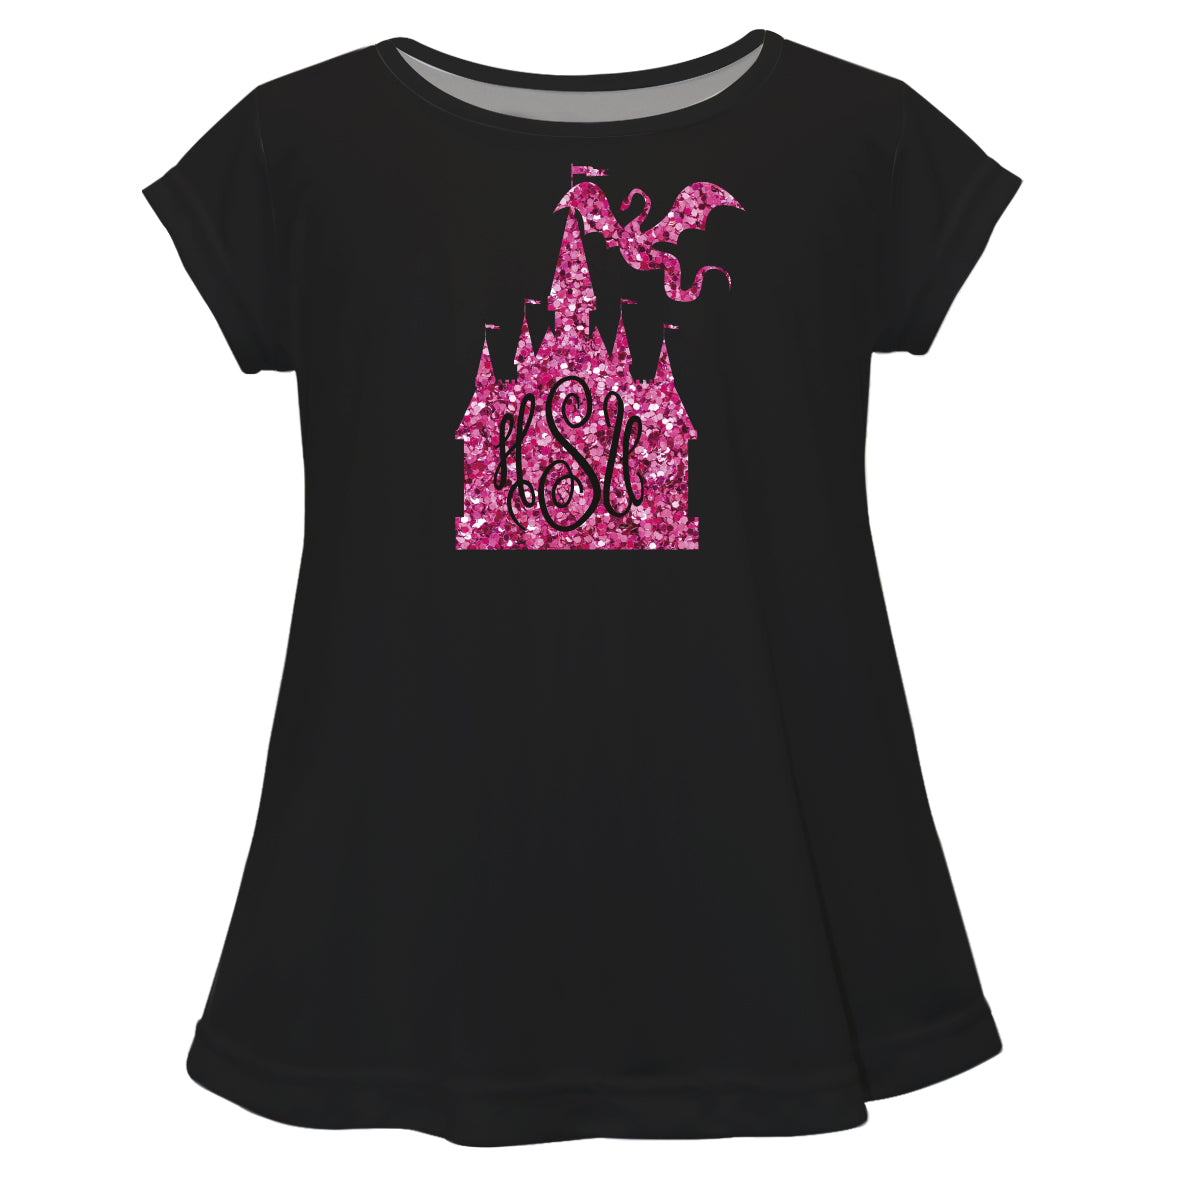 Castle and Personalized Monogram Black Short Sleeve Laurie Top - Wimziy&Co.